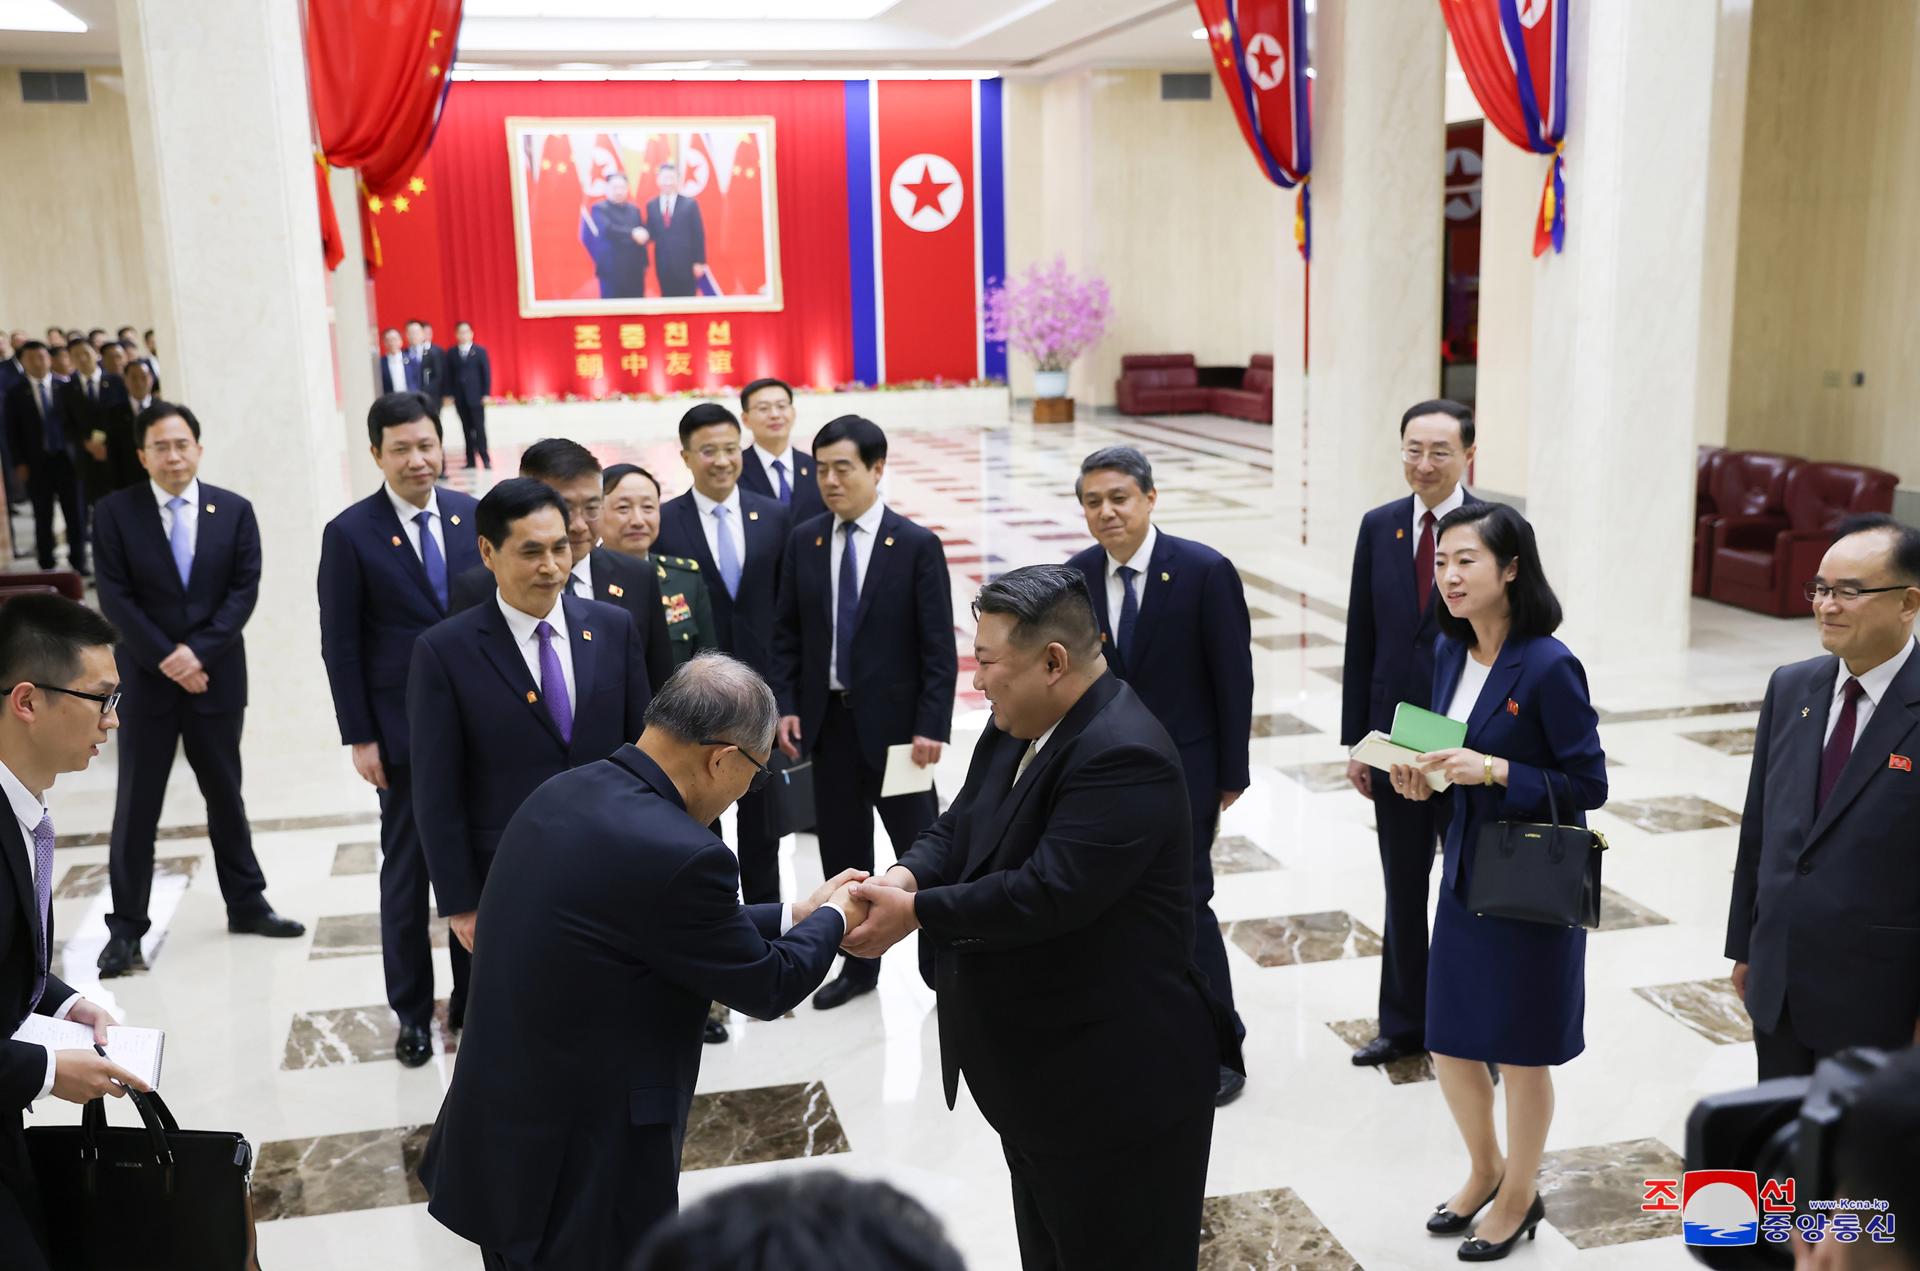 A photo released by the official North Korean Central News Agency (KCNA) on 29 July 2023, shows North Korean leader Kim Jong Un (C) during a meeting with a Chinese delegation led by Li Hongzhong (C-L), member of the Political Bureau of the Central Committee of the Communist Party of China, in Pyongyang, North Korea, July 28, 2023. EFE/EPA/KCNA EDITORIAL USE ONLY
